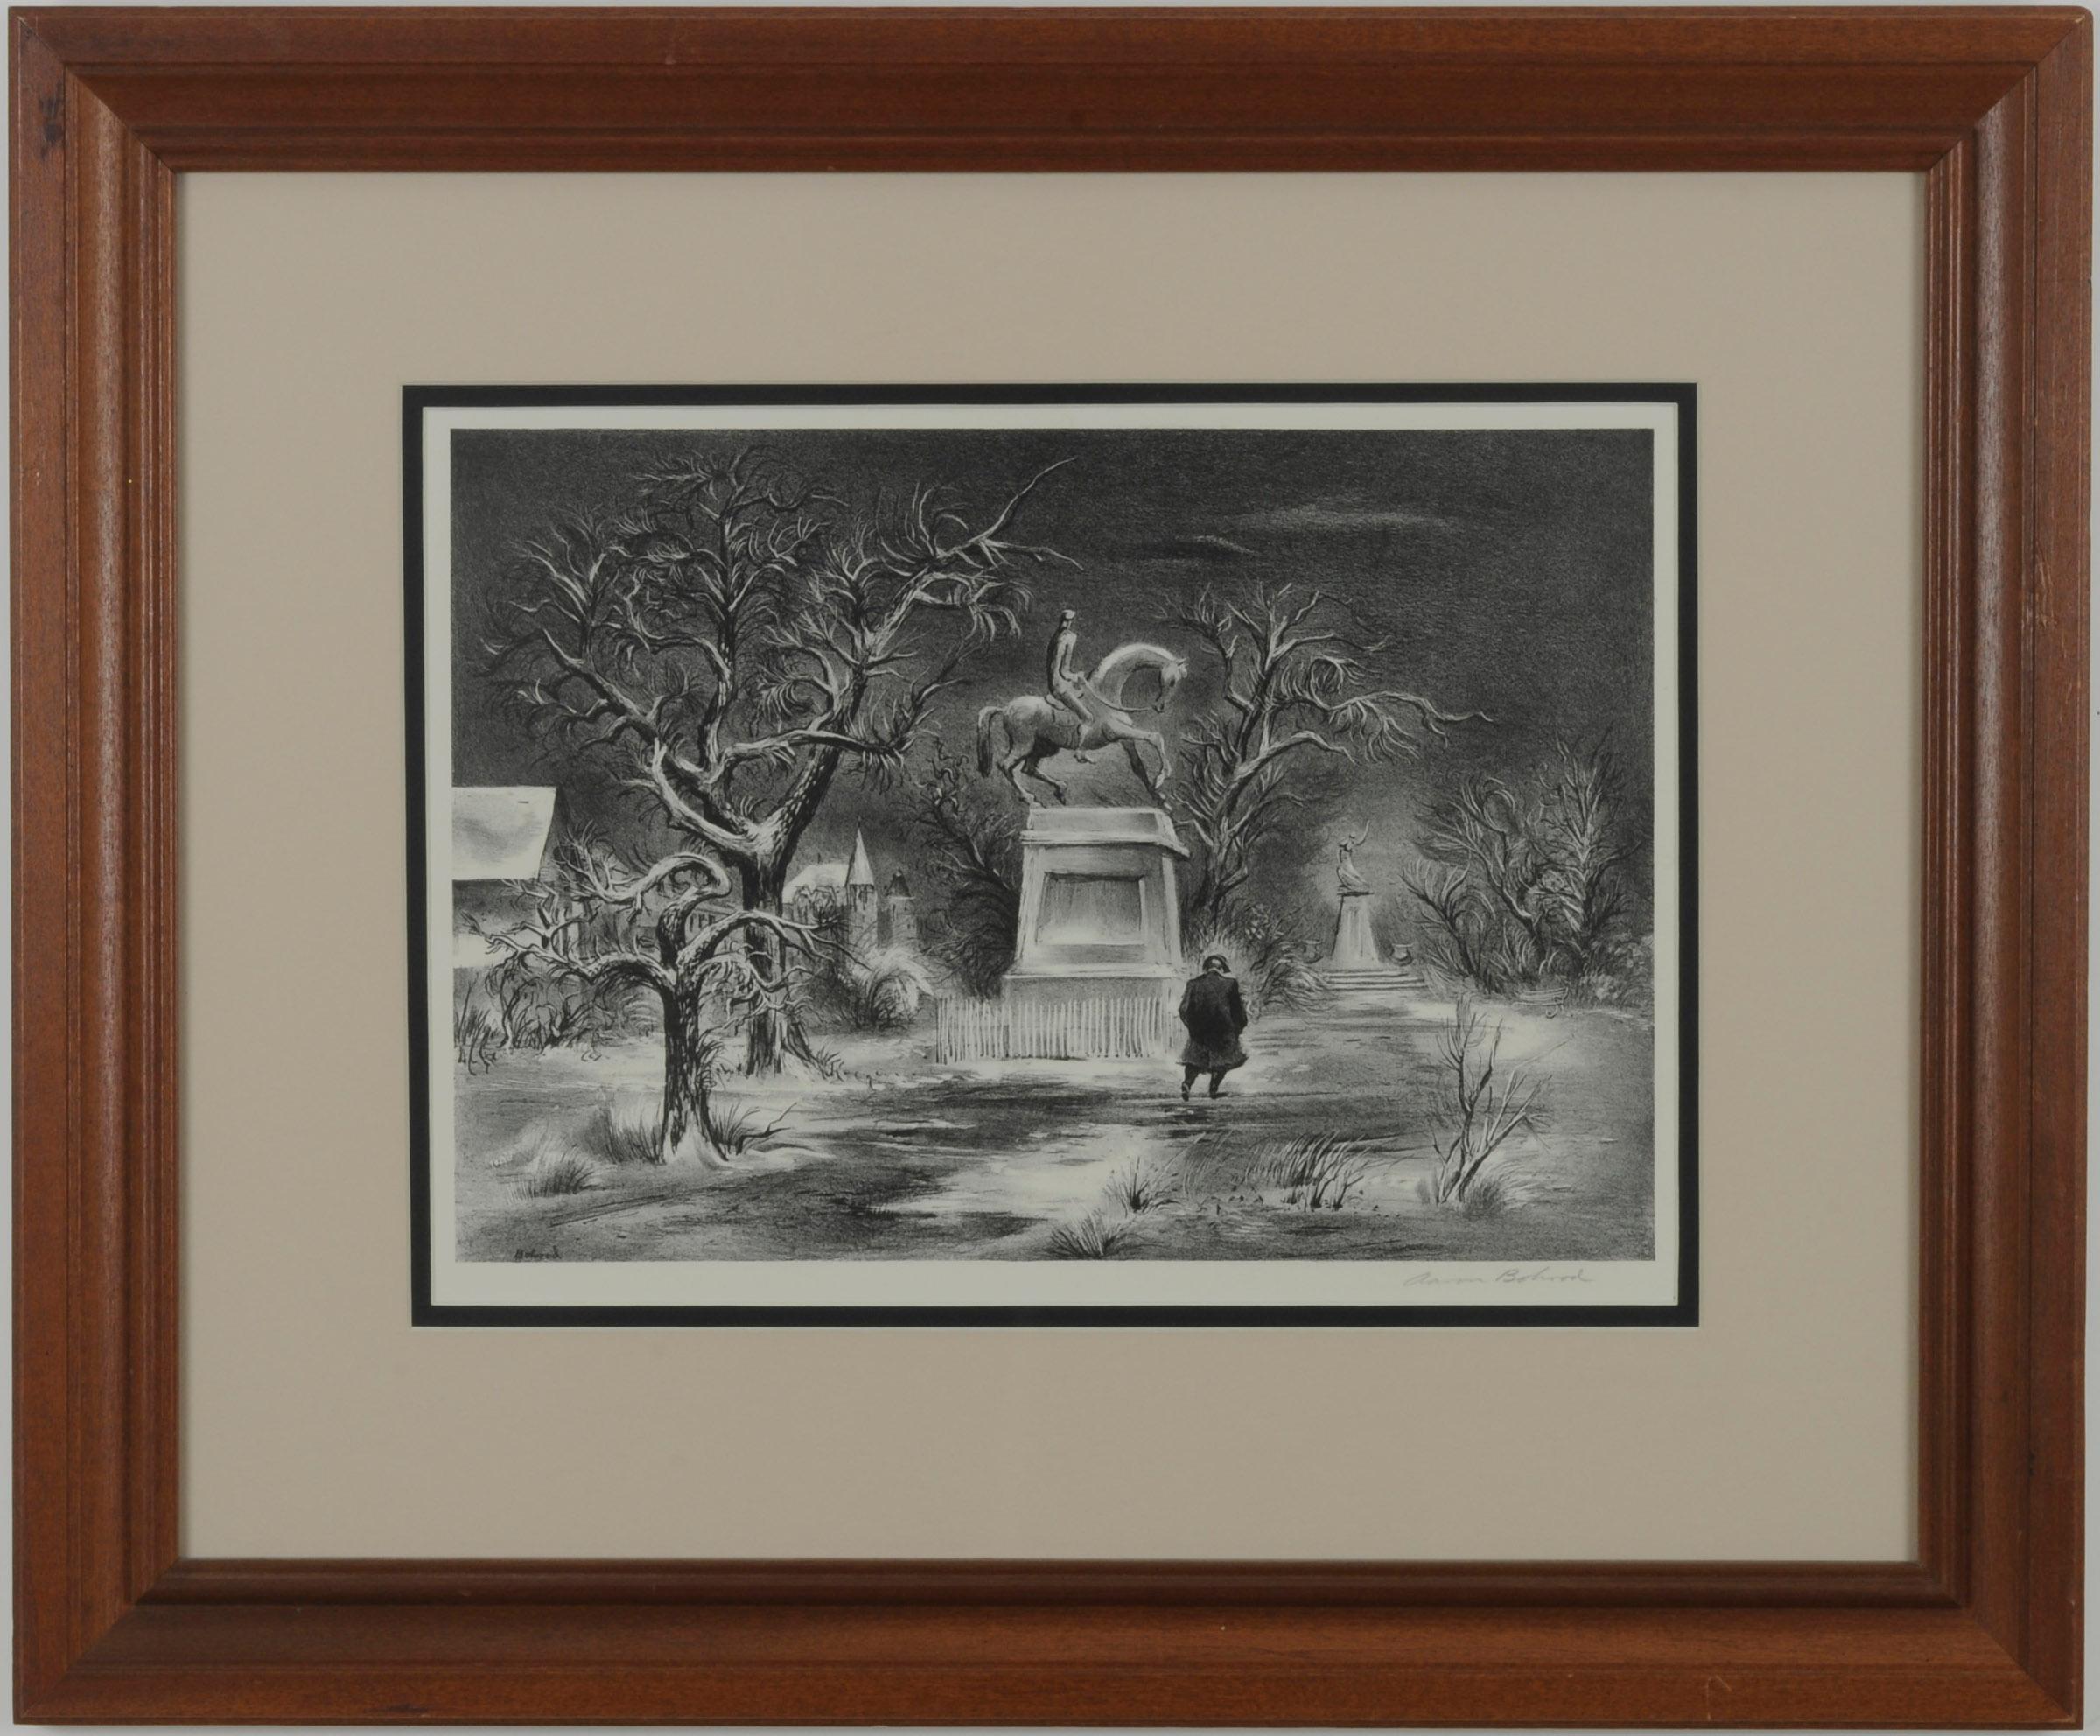 City Park, Winter
Lithograph, c. 1947
Signed in pencil lower right (see photo)
Published by Associated American Artists
Printed by George C. Miller, New York
Edition: c. 250
In the Bohrod papers at Syracuse University, the artist states that it is a